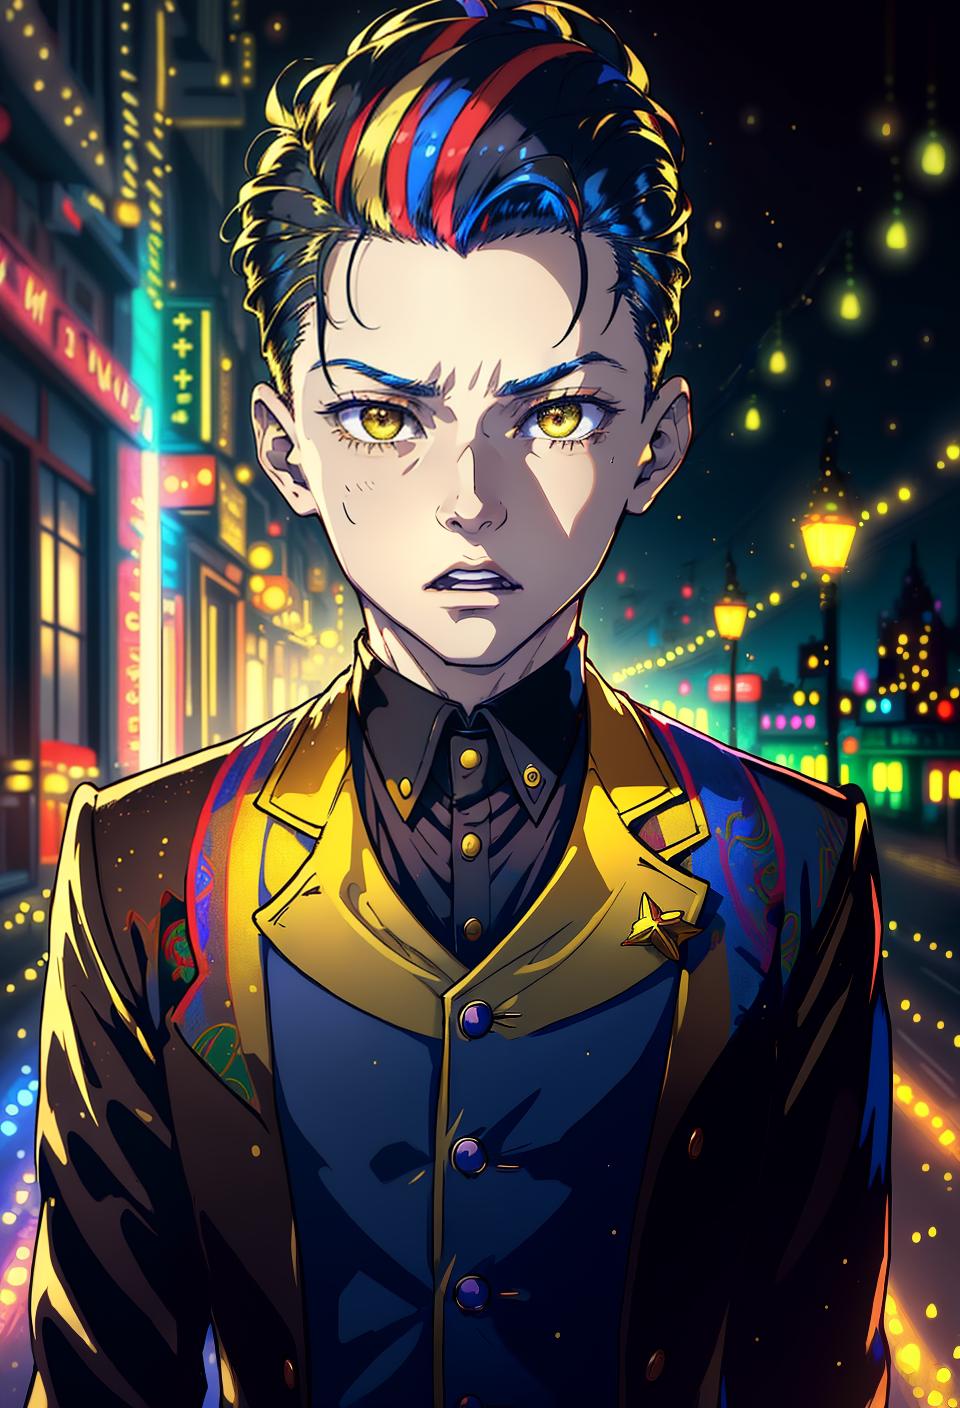  ((trending, highres, masterpiece, cinematic shot)), 1boy, young, male Christmas outfit, psychedelic effects, long spiked rainbow hair, hair slicked back,  yellow eyes, rational personality, surprised expression, very pale skin, orderly, limber